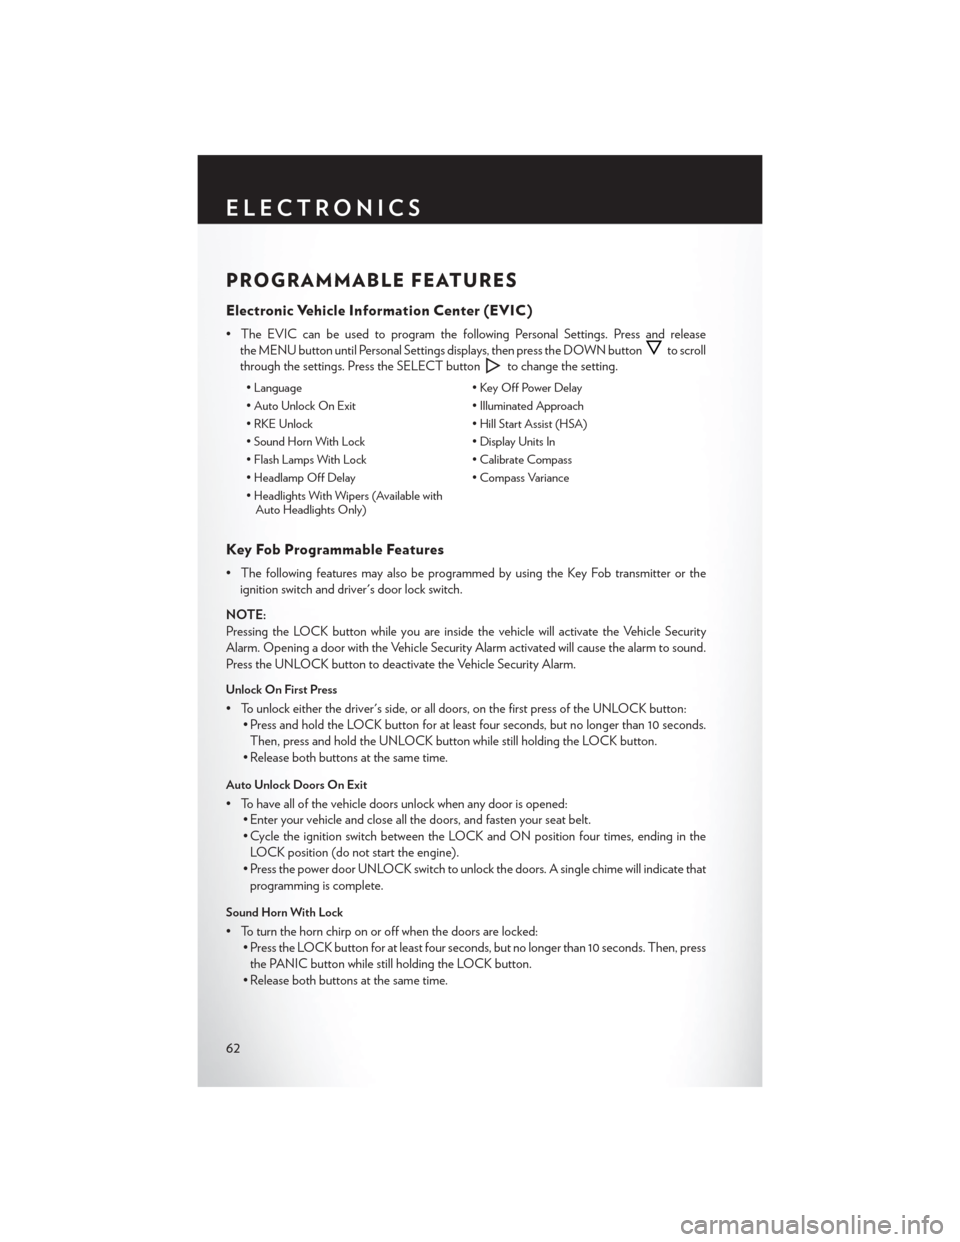 CHRYSLER 200 2013 1.G User Guide PROGRAMMABLE FEATURES
Electronic Vehicle Information Center (EVIC)
• The EVIC can be used to program the following Personal Settings. Press and releasethe MENU button until Personal Settings display